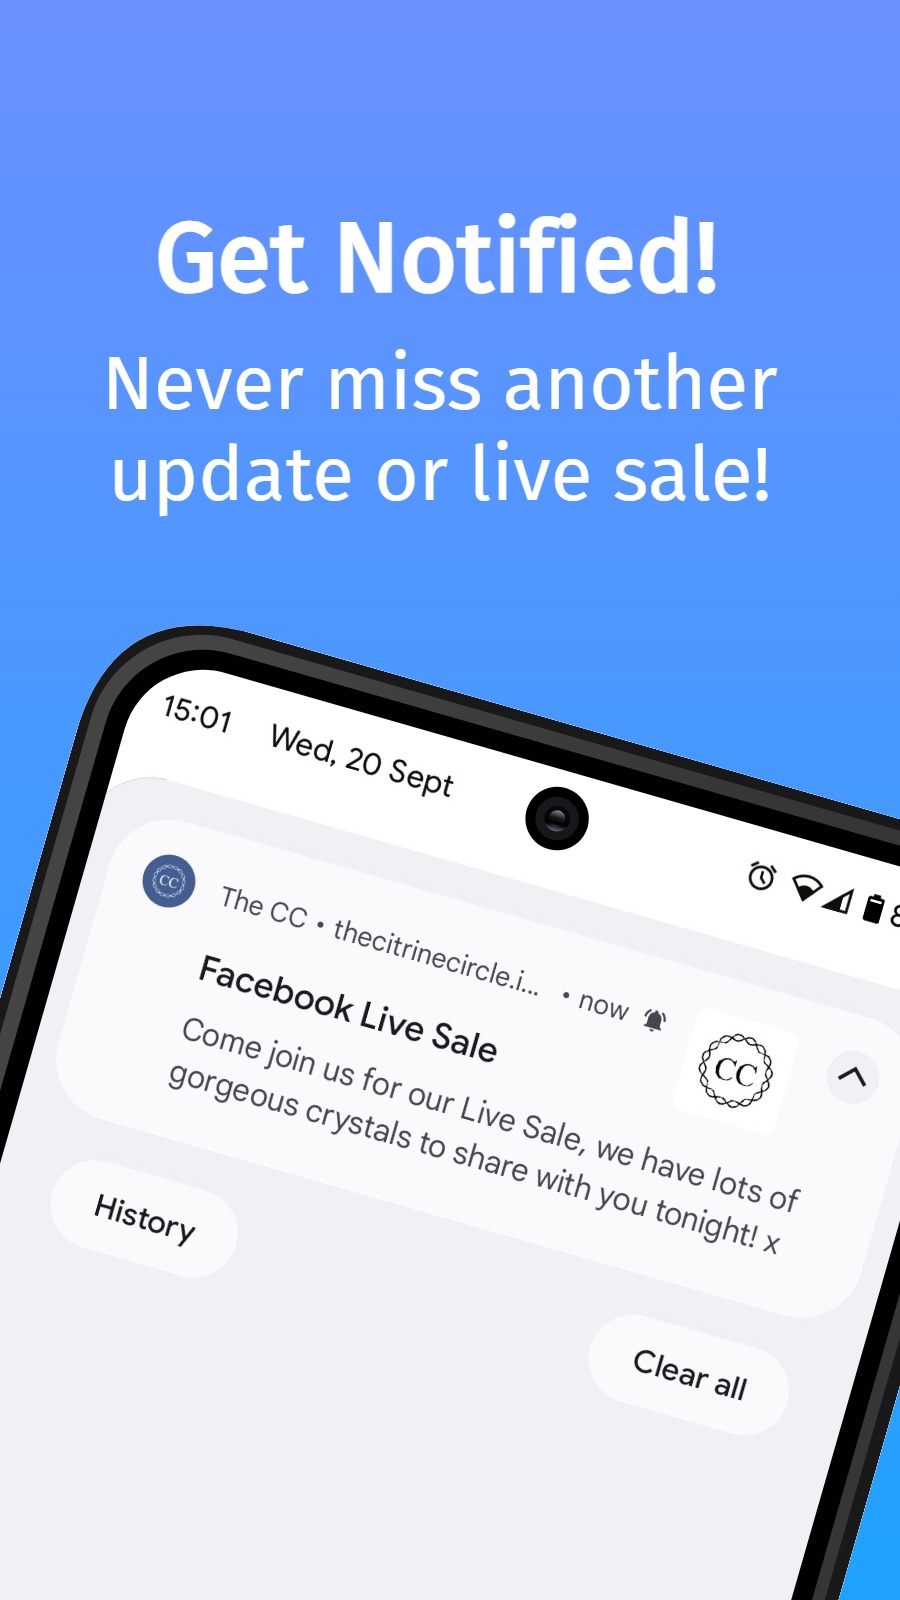 Get Notified! - Never miss another update or live sale!